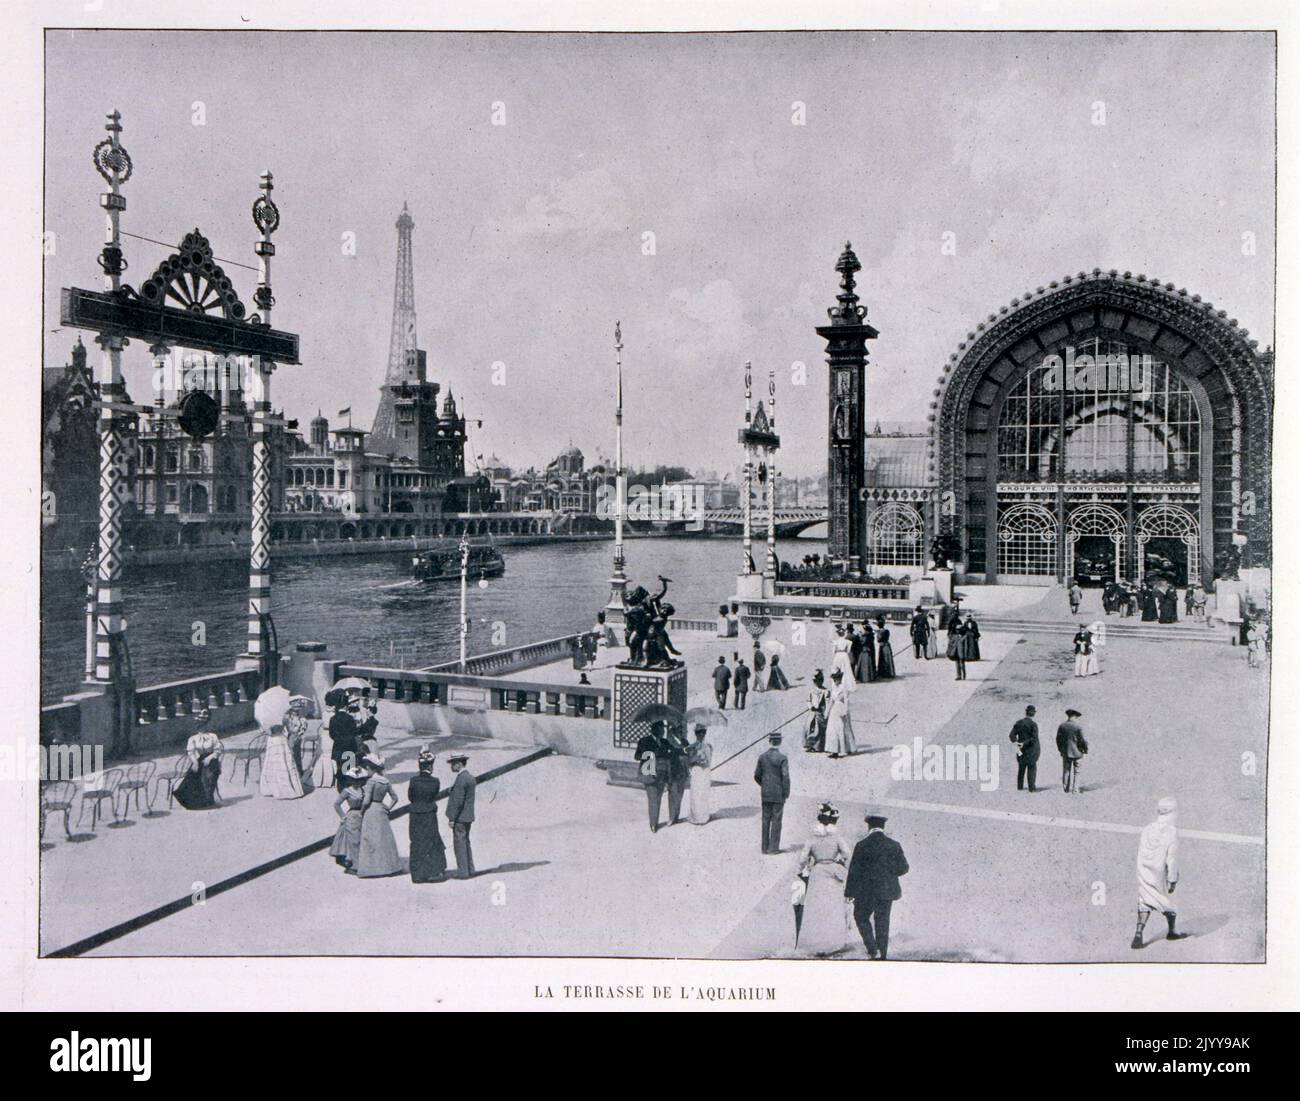 Exposition Universelle (World Fair) Paris, 1900; The Exposition Universelle of 1900, better known in English as the 1900 Paris Exposition, was a world's fair held in Paris, France, from 14 April to 12 November 1900, to celebrate the achievements of the past century and to accelerate development into the next. The style that was universally present in the Exposition was Art Nouveau. The fair, visited by nearly 50 million, displayed many technological innovations; black and white photograph of the terrace of the aquarium. Stock Photo